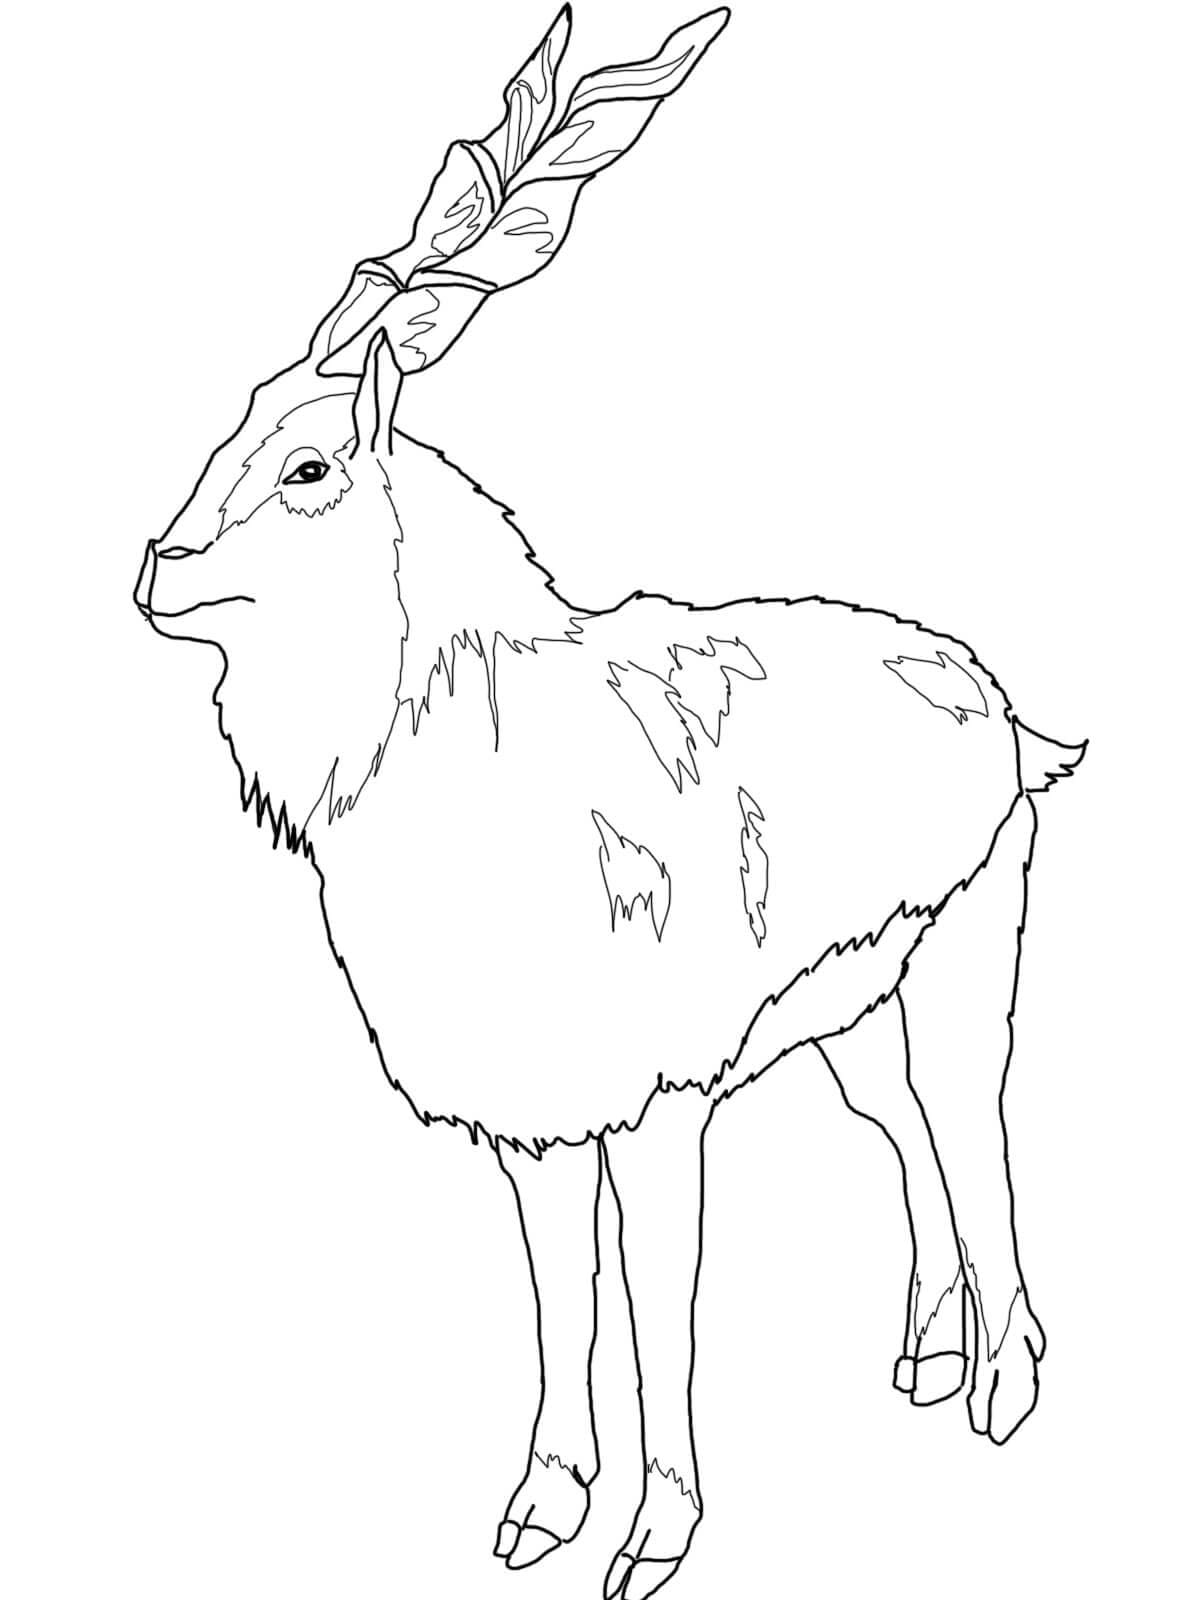 Normal Markhor Coloring Page